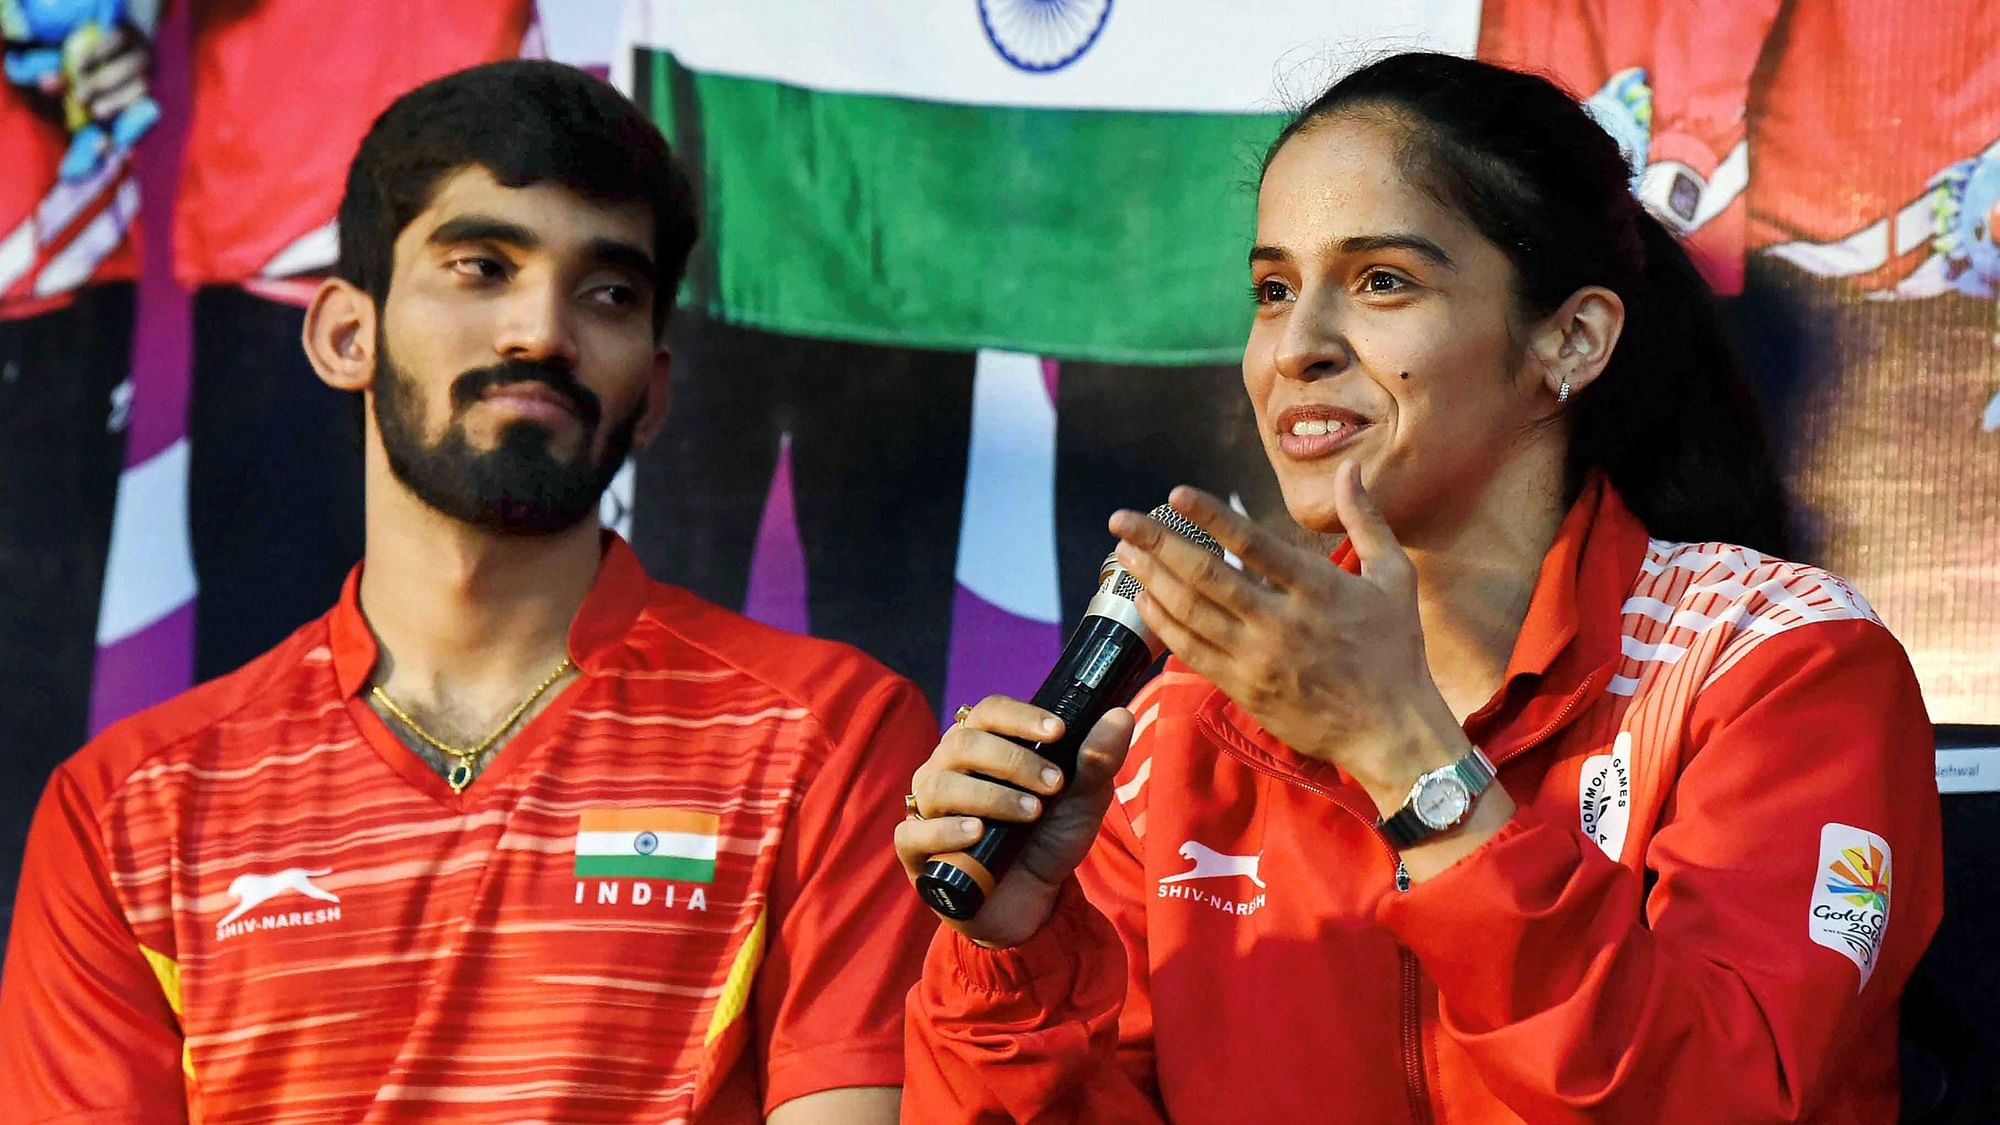 Despite the ban on Indian flights, Indian badminton players are likely to participate in the year’s final Olympic qualification events.